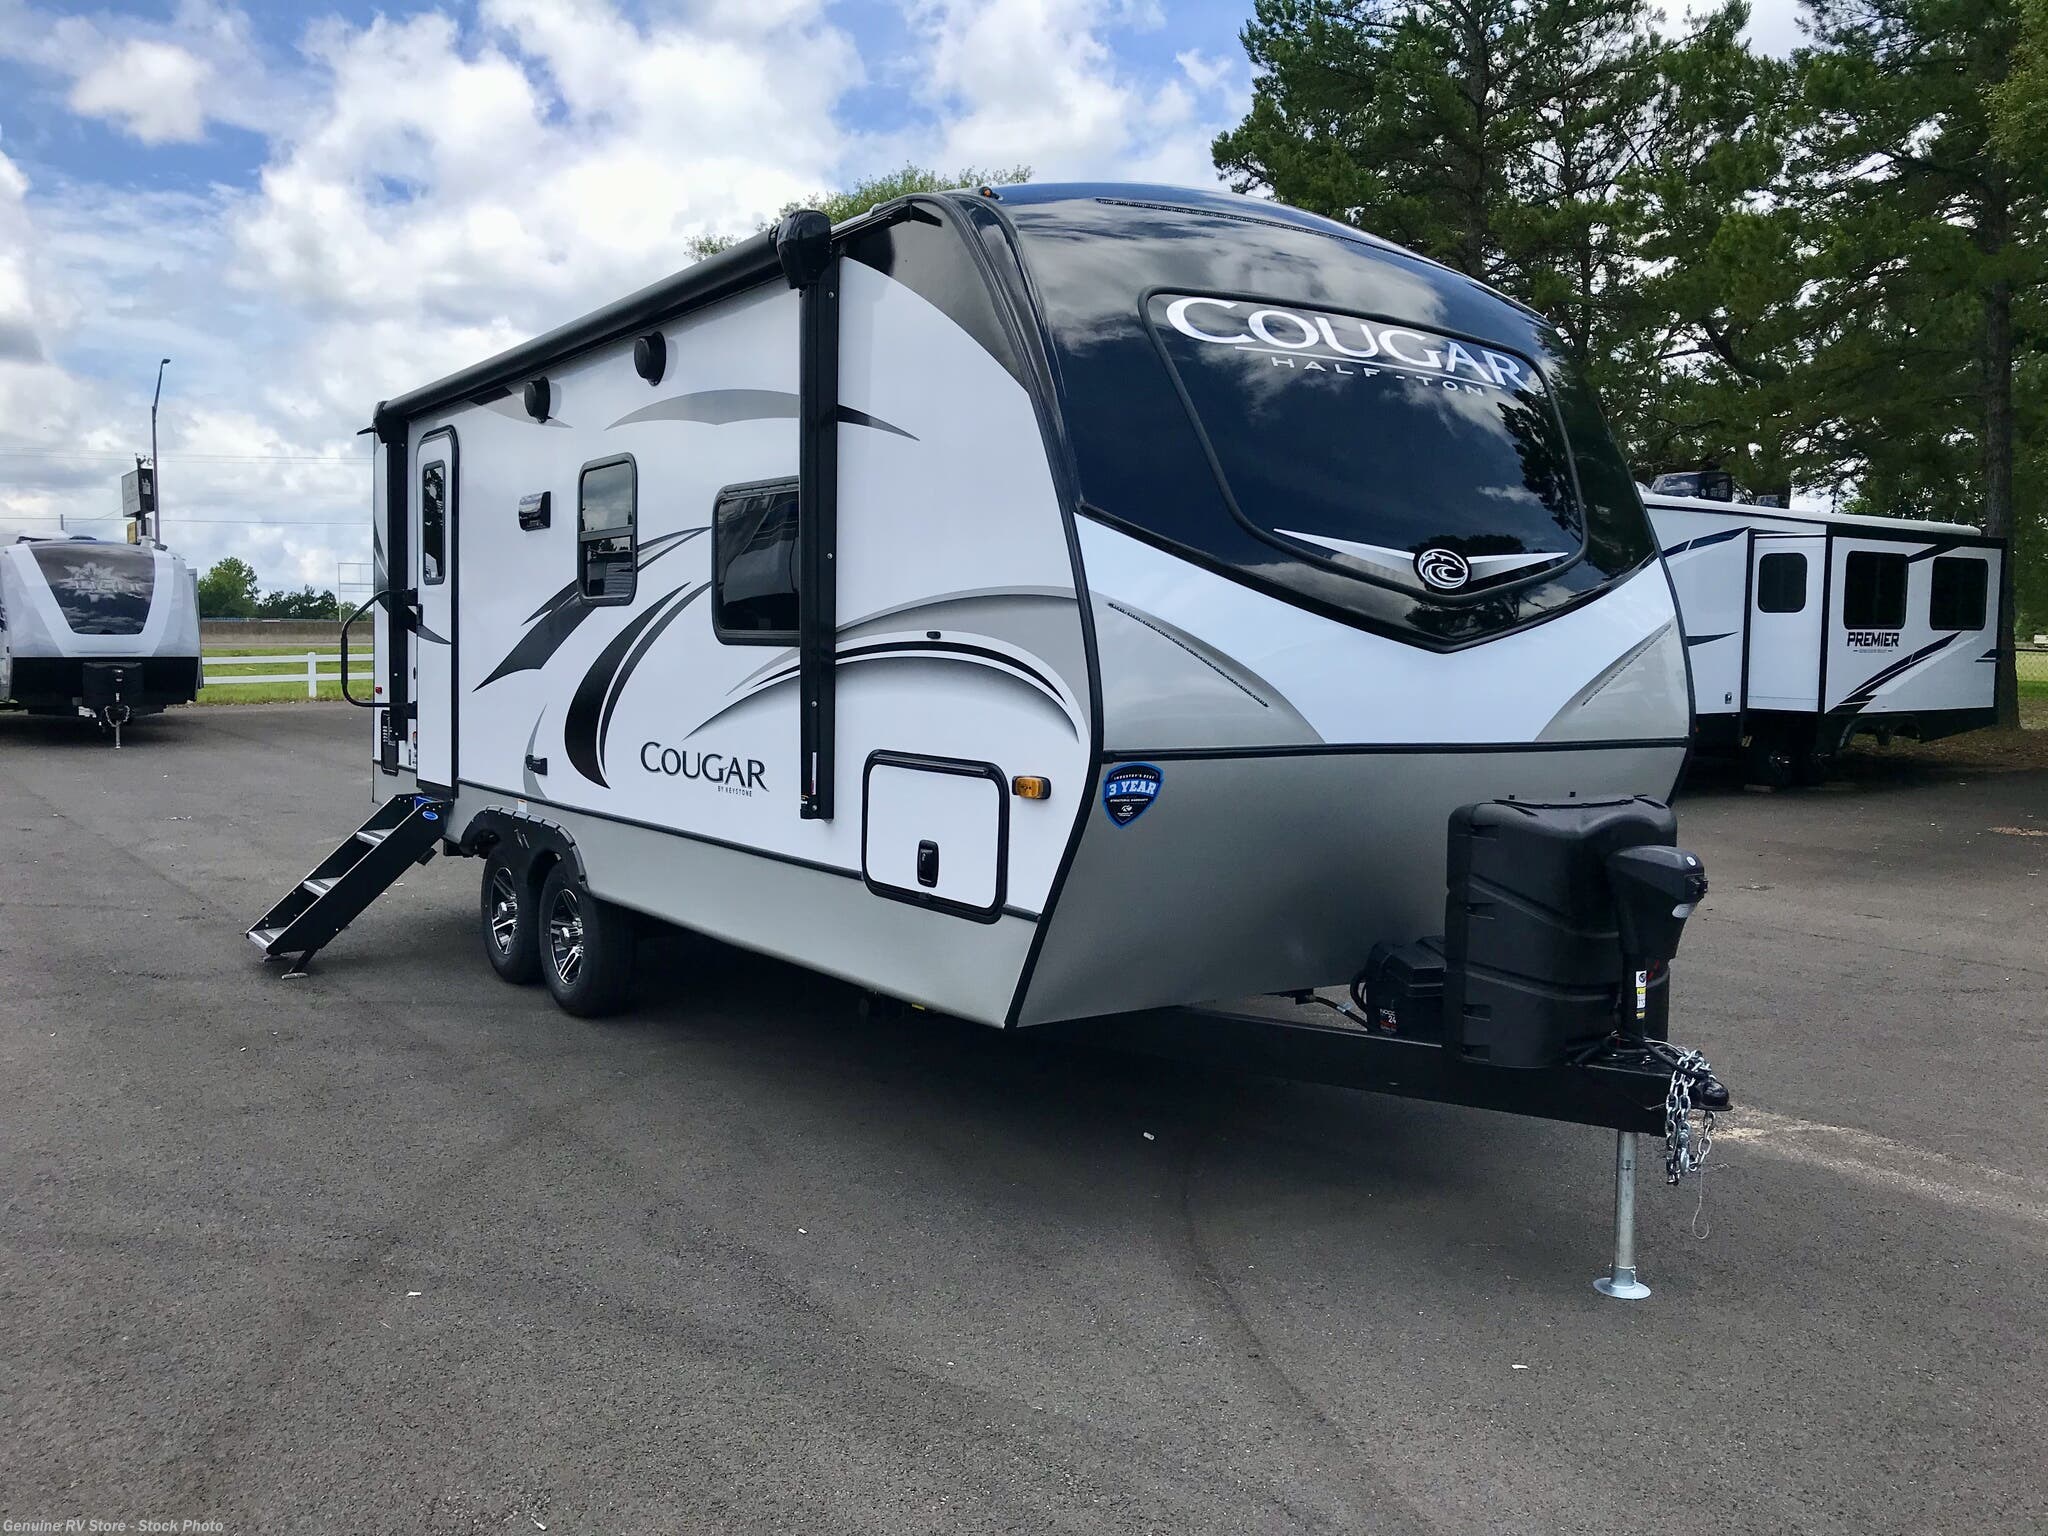 2022 Keystone Cougar 22rbs Rv For Sale In Nacogdoches Tx 75964 Approximate Arrival Fall 2021 Rvusa Com Classifieds